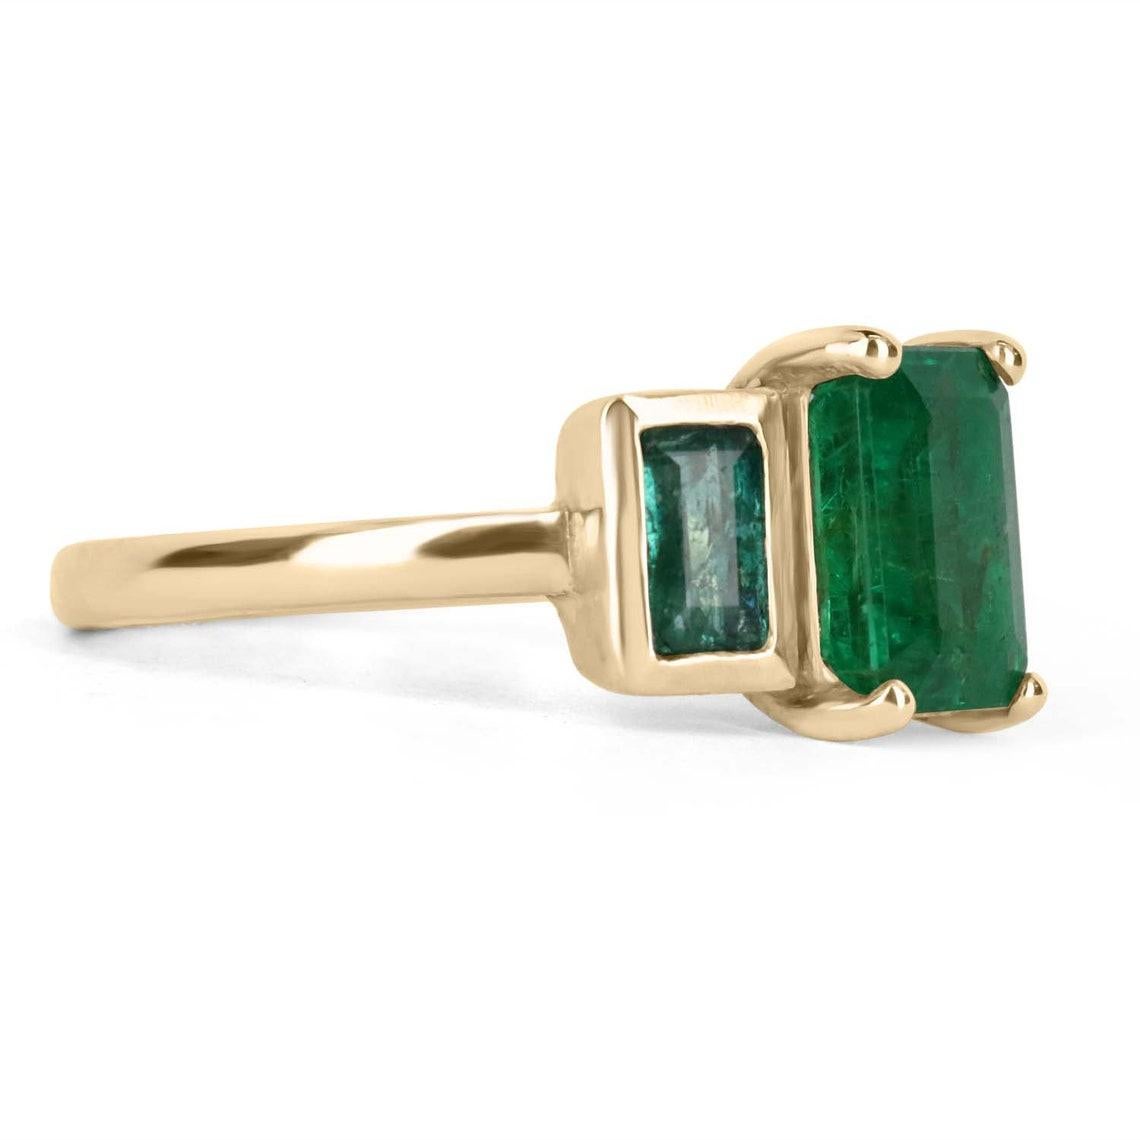 A Zambian emerald three-stone trilogy ring. This bespoke ring design is handcrafted in gleaming 14K solid yellow gold. The gorgeous piece features a rich dark green four-prong 1.75-carat emerald cut in its center. Emerald cut emeralds are flanked on